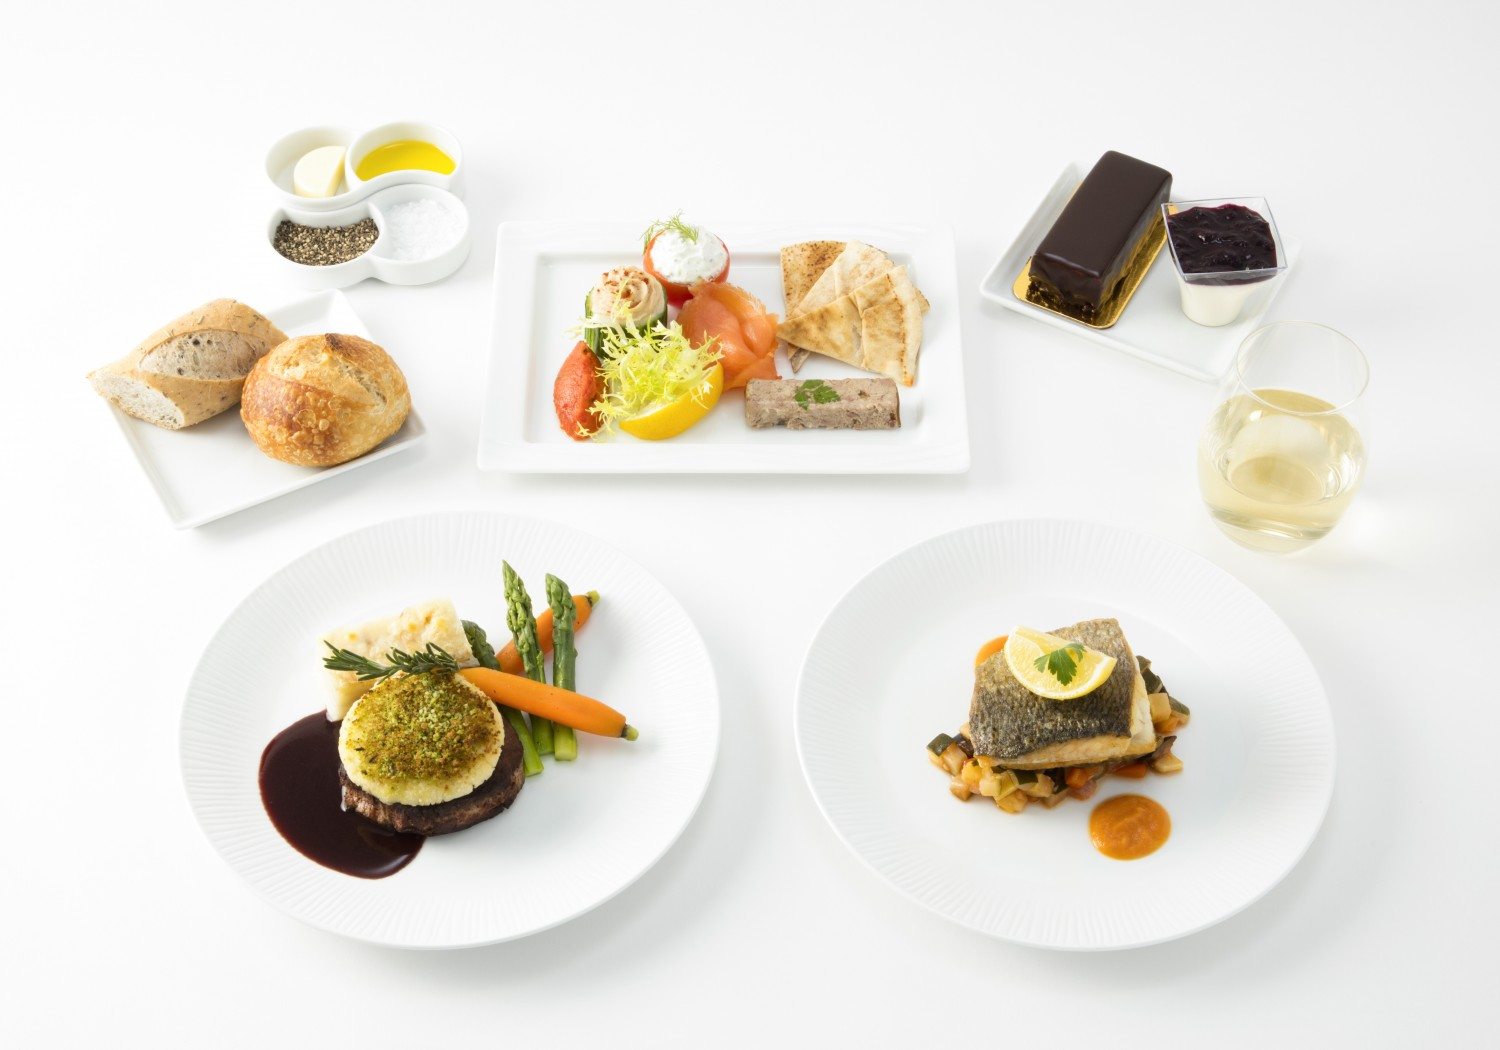 Hilton Worldwide and ANA Offer Delicious New Promotions to Celebration Their Partnership